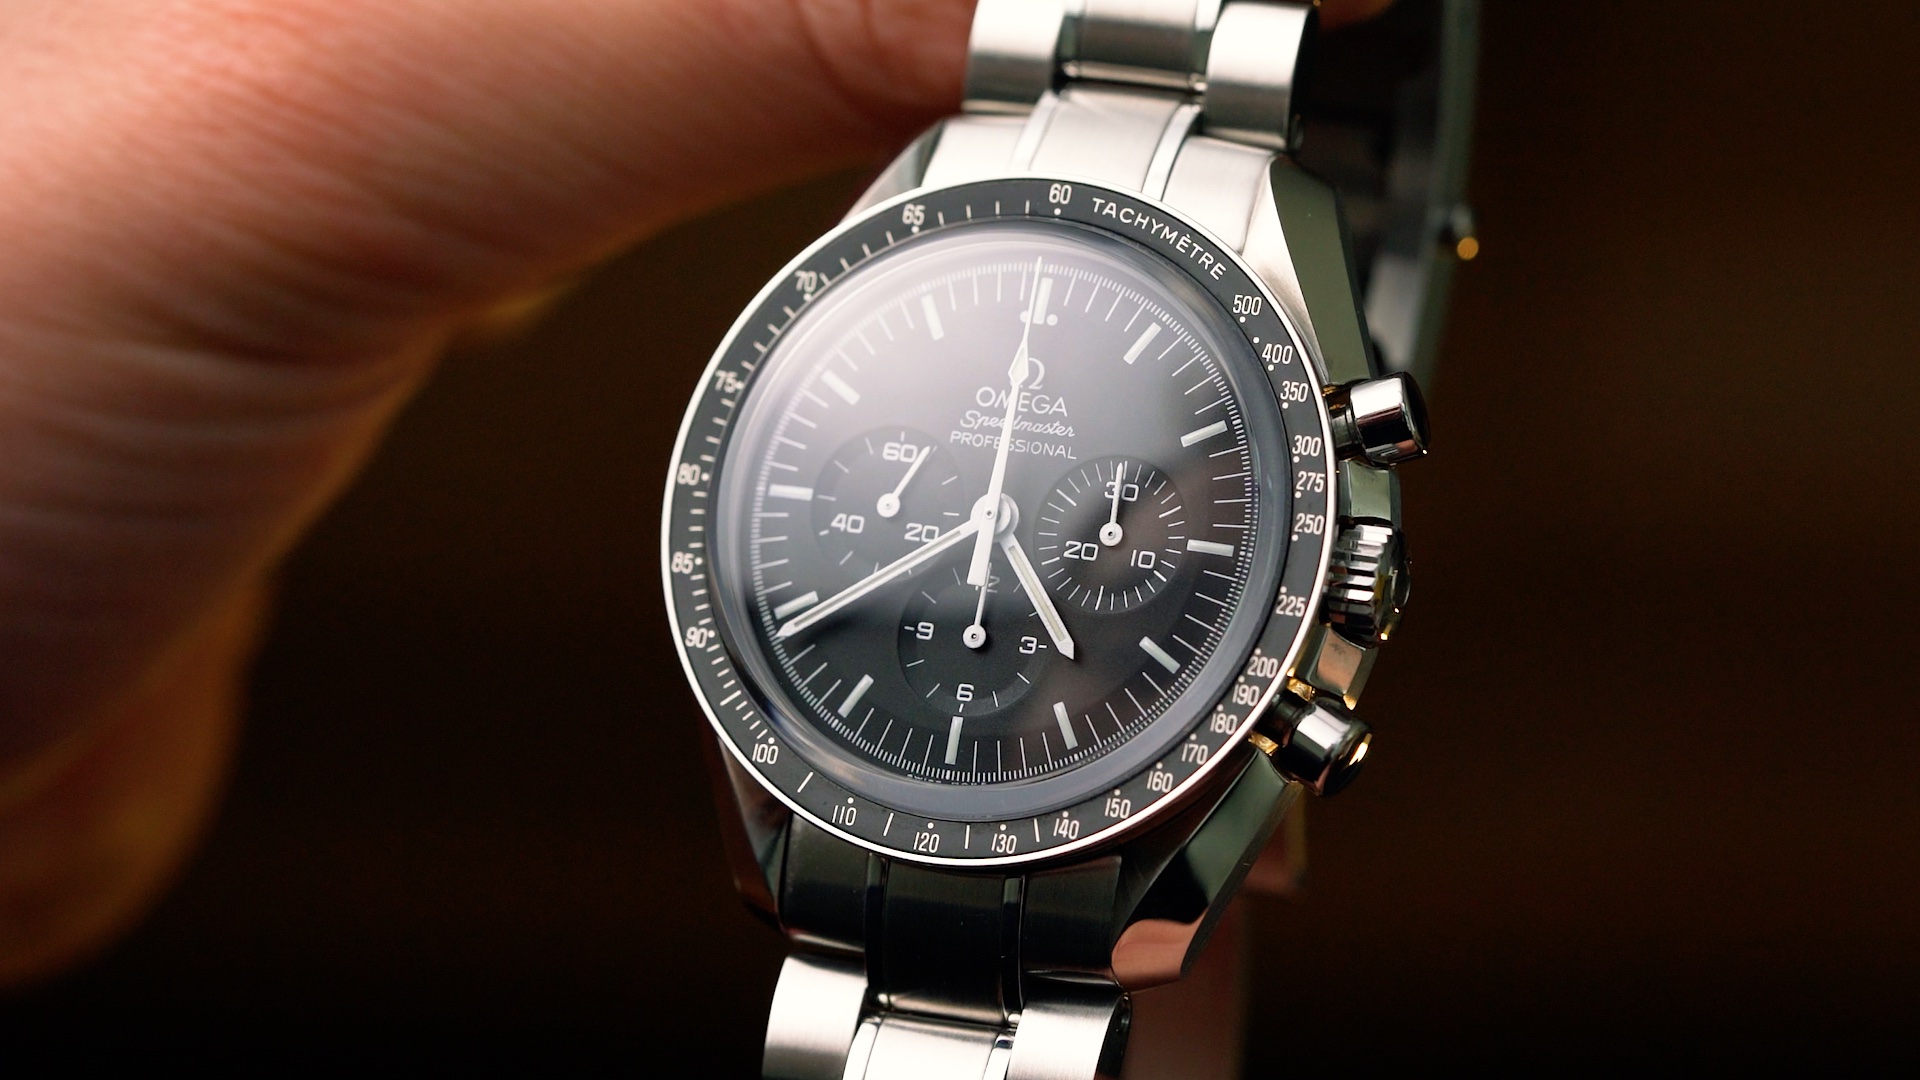 VIDEO: One final loving glance at the now phased out (and much cheaper) Omega Speedmaster “Sapphire Sandwich”, which will only be in store while final stocks last